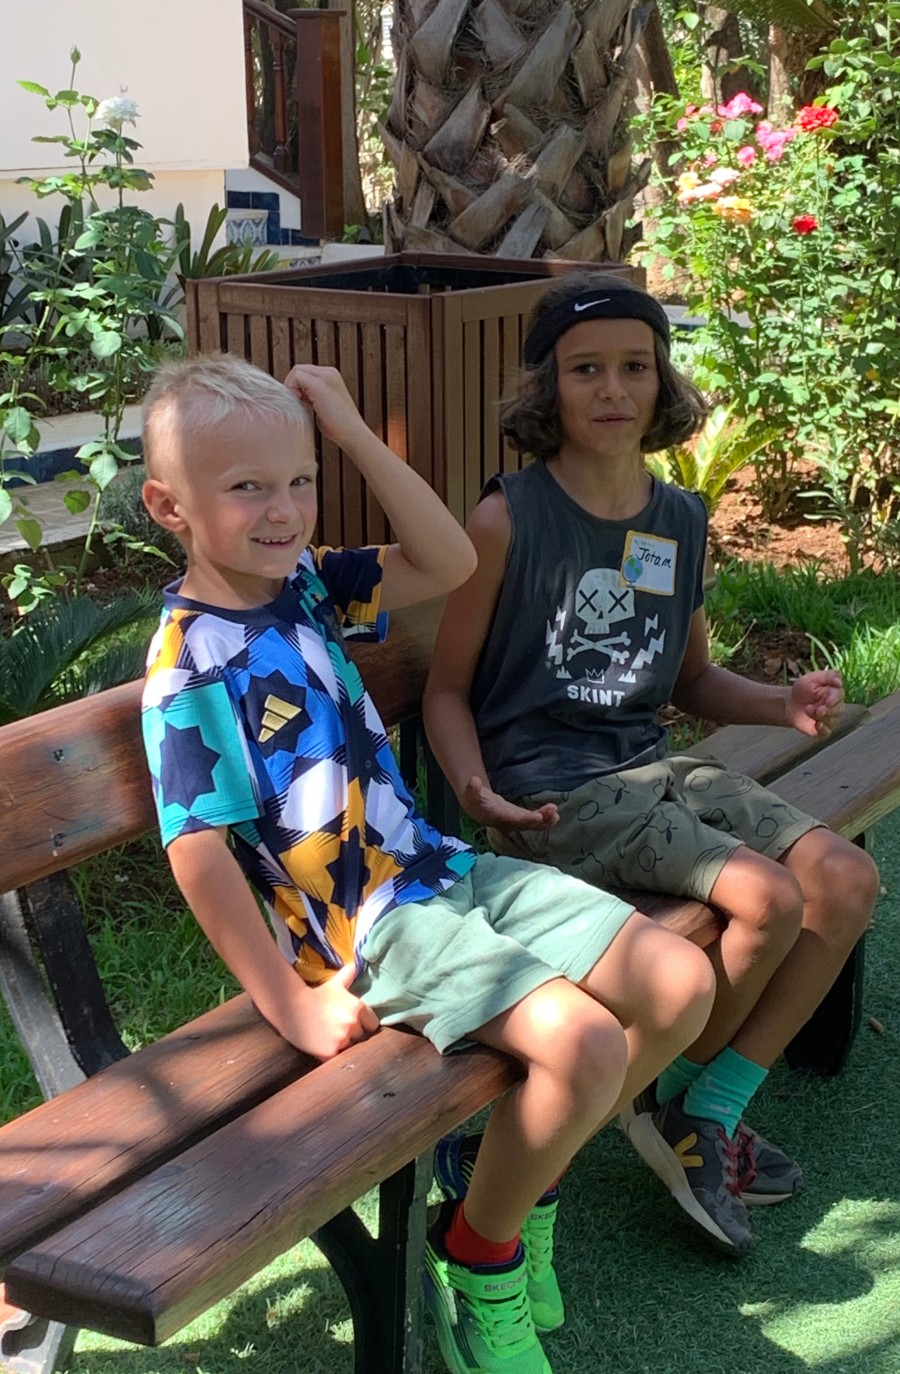 Two kids sitting on a bench